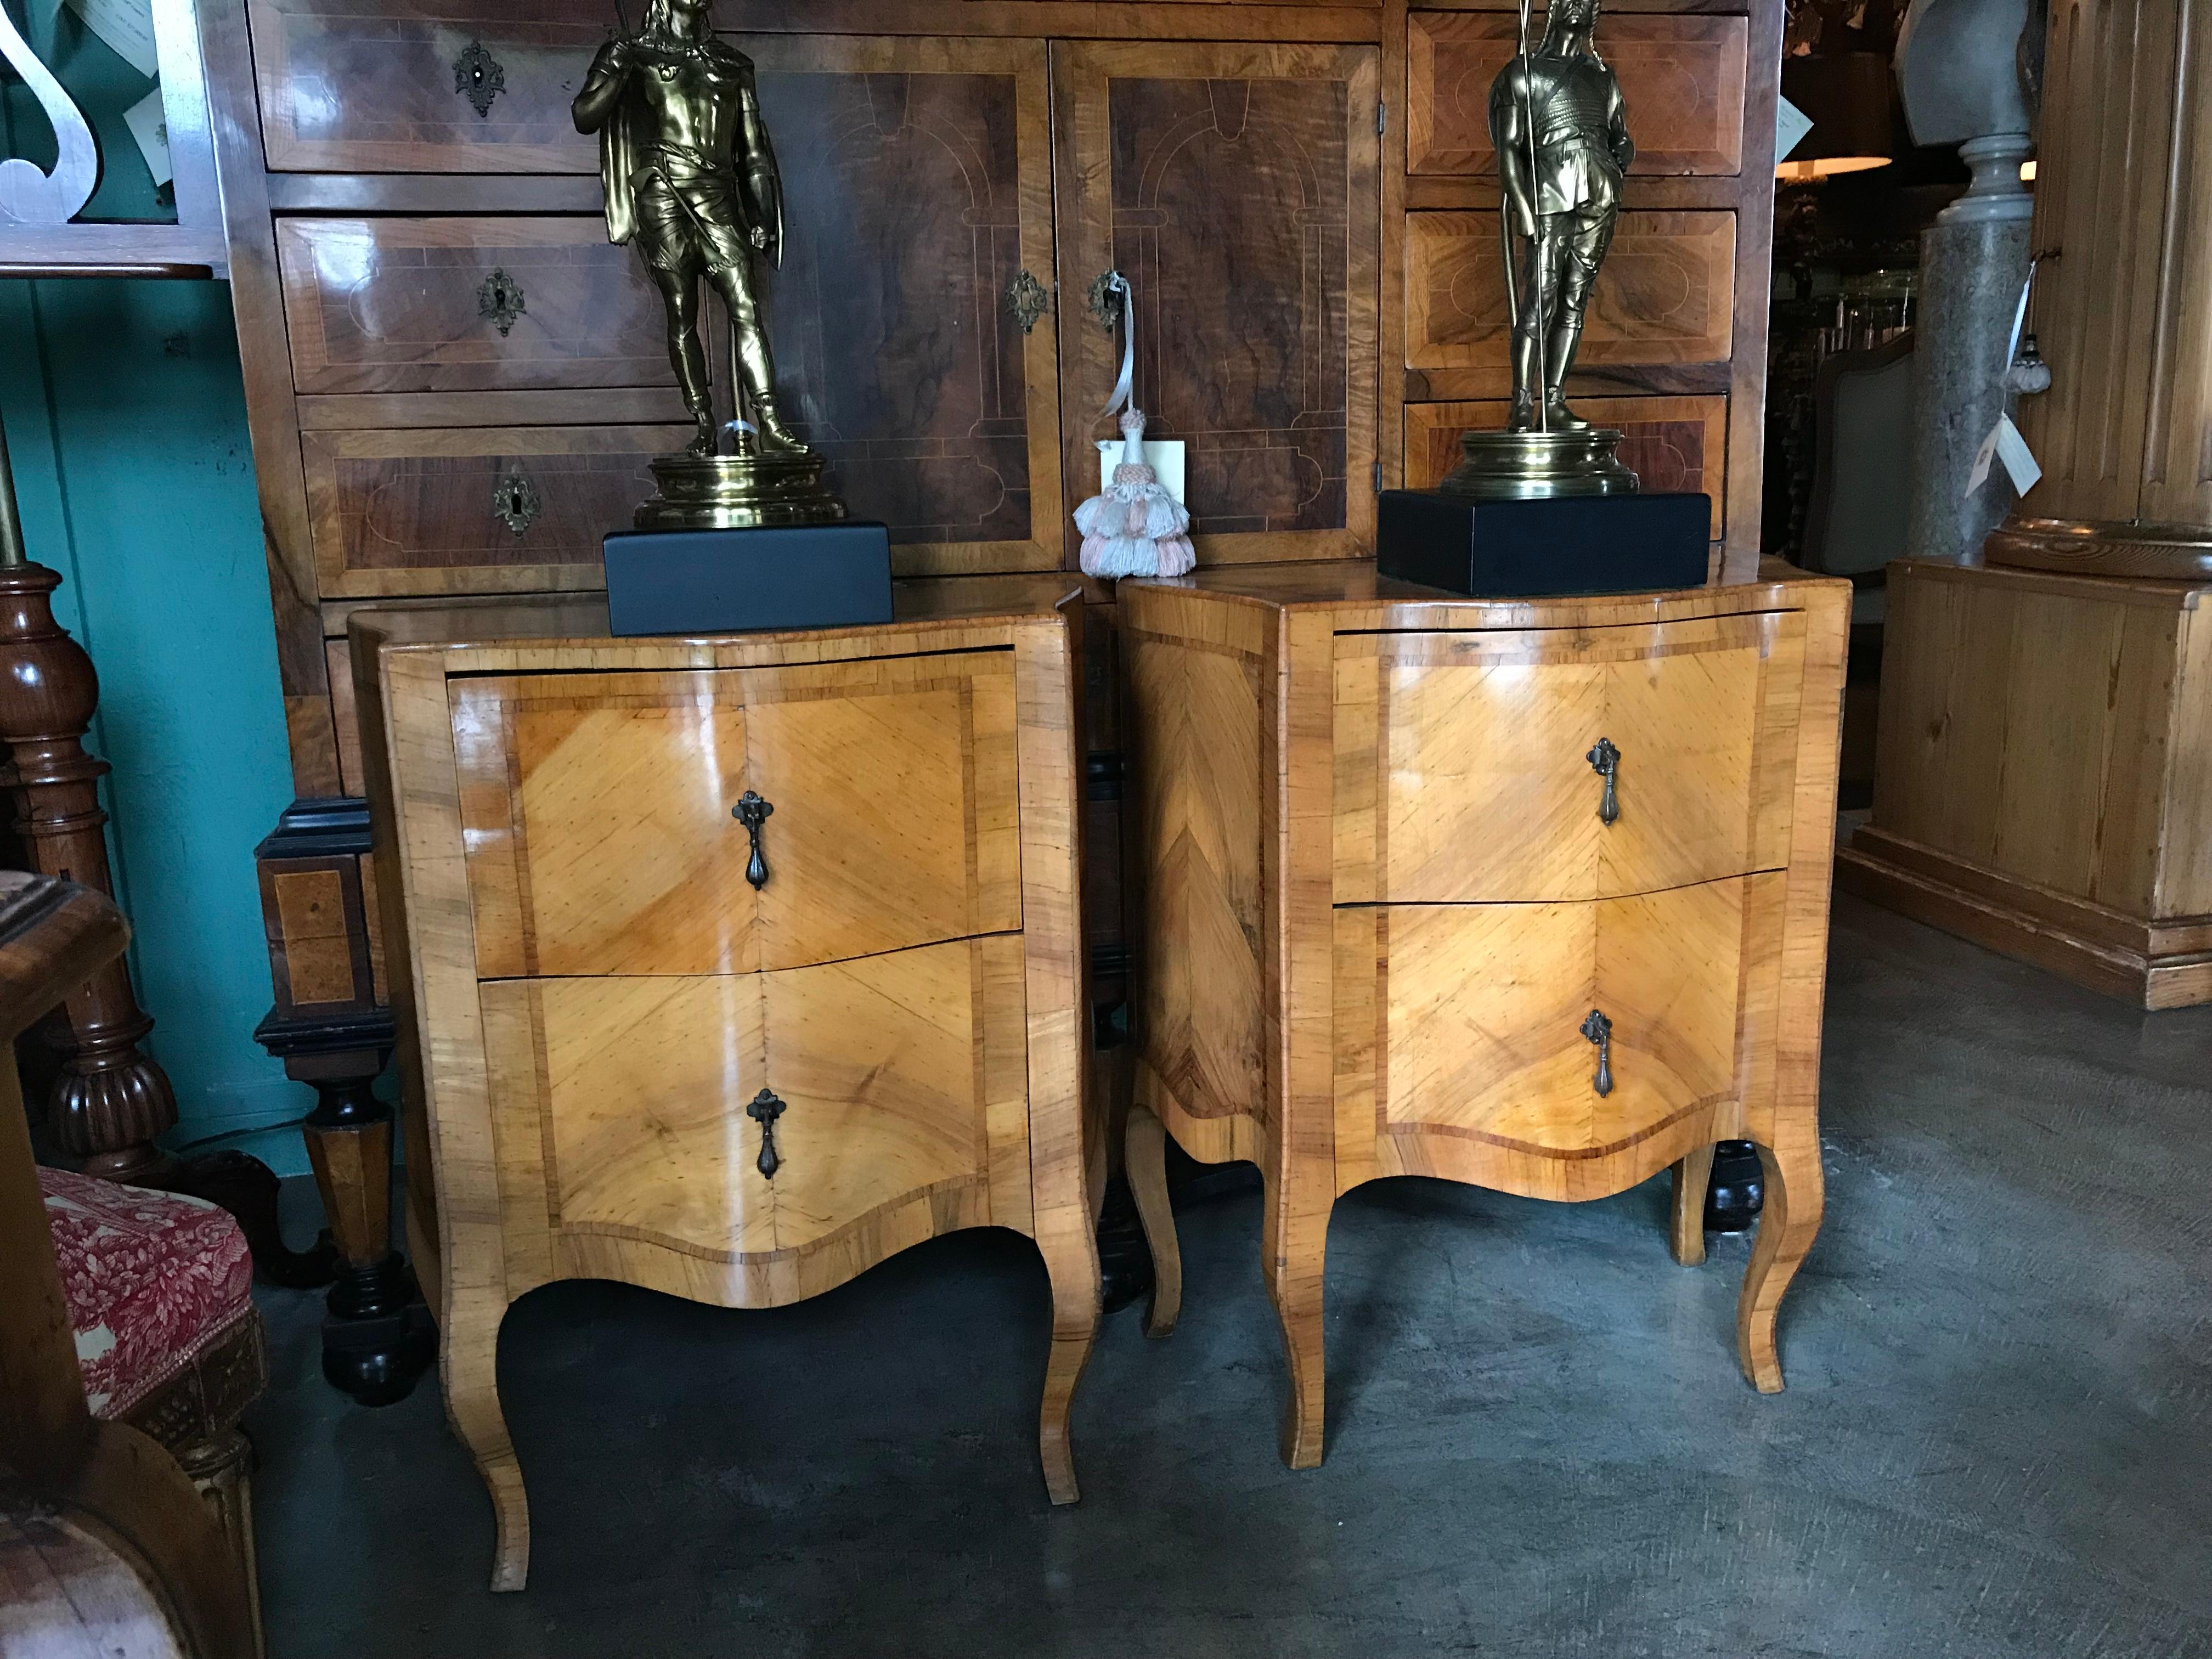 Pair of late 18th century Italian inlaid bedside fruit wood 
Comodini commodes bedside chest of drawers side tables. Very elegant work. 
They would serve as night tables on each side of the bed. It's a set of 2 pieces ( sold as a pair for a list